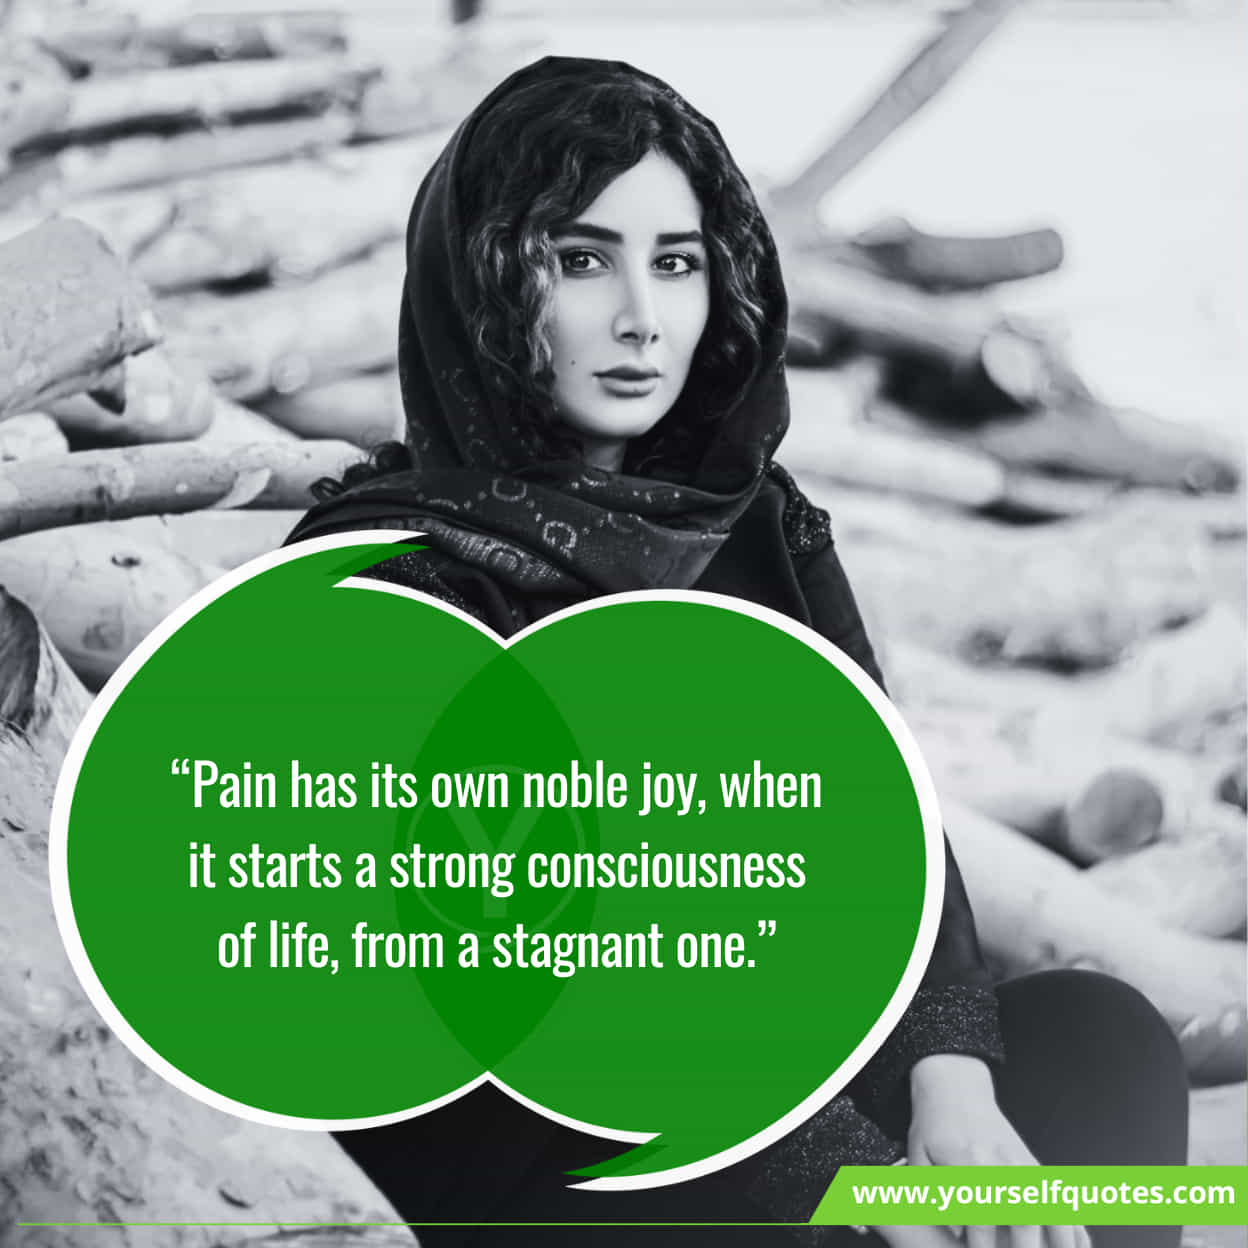 Best Quotes About Pain